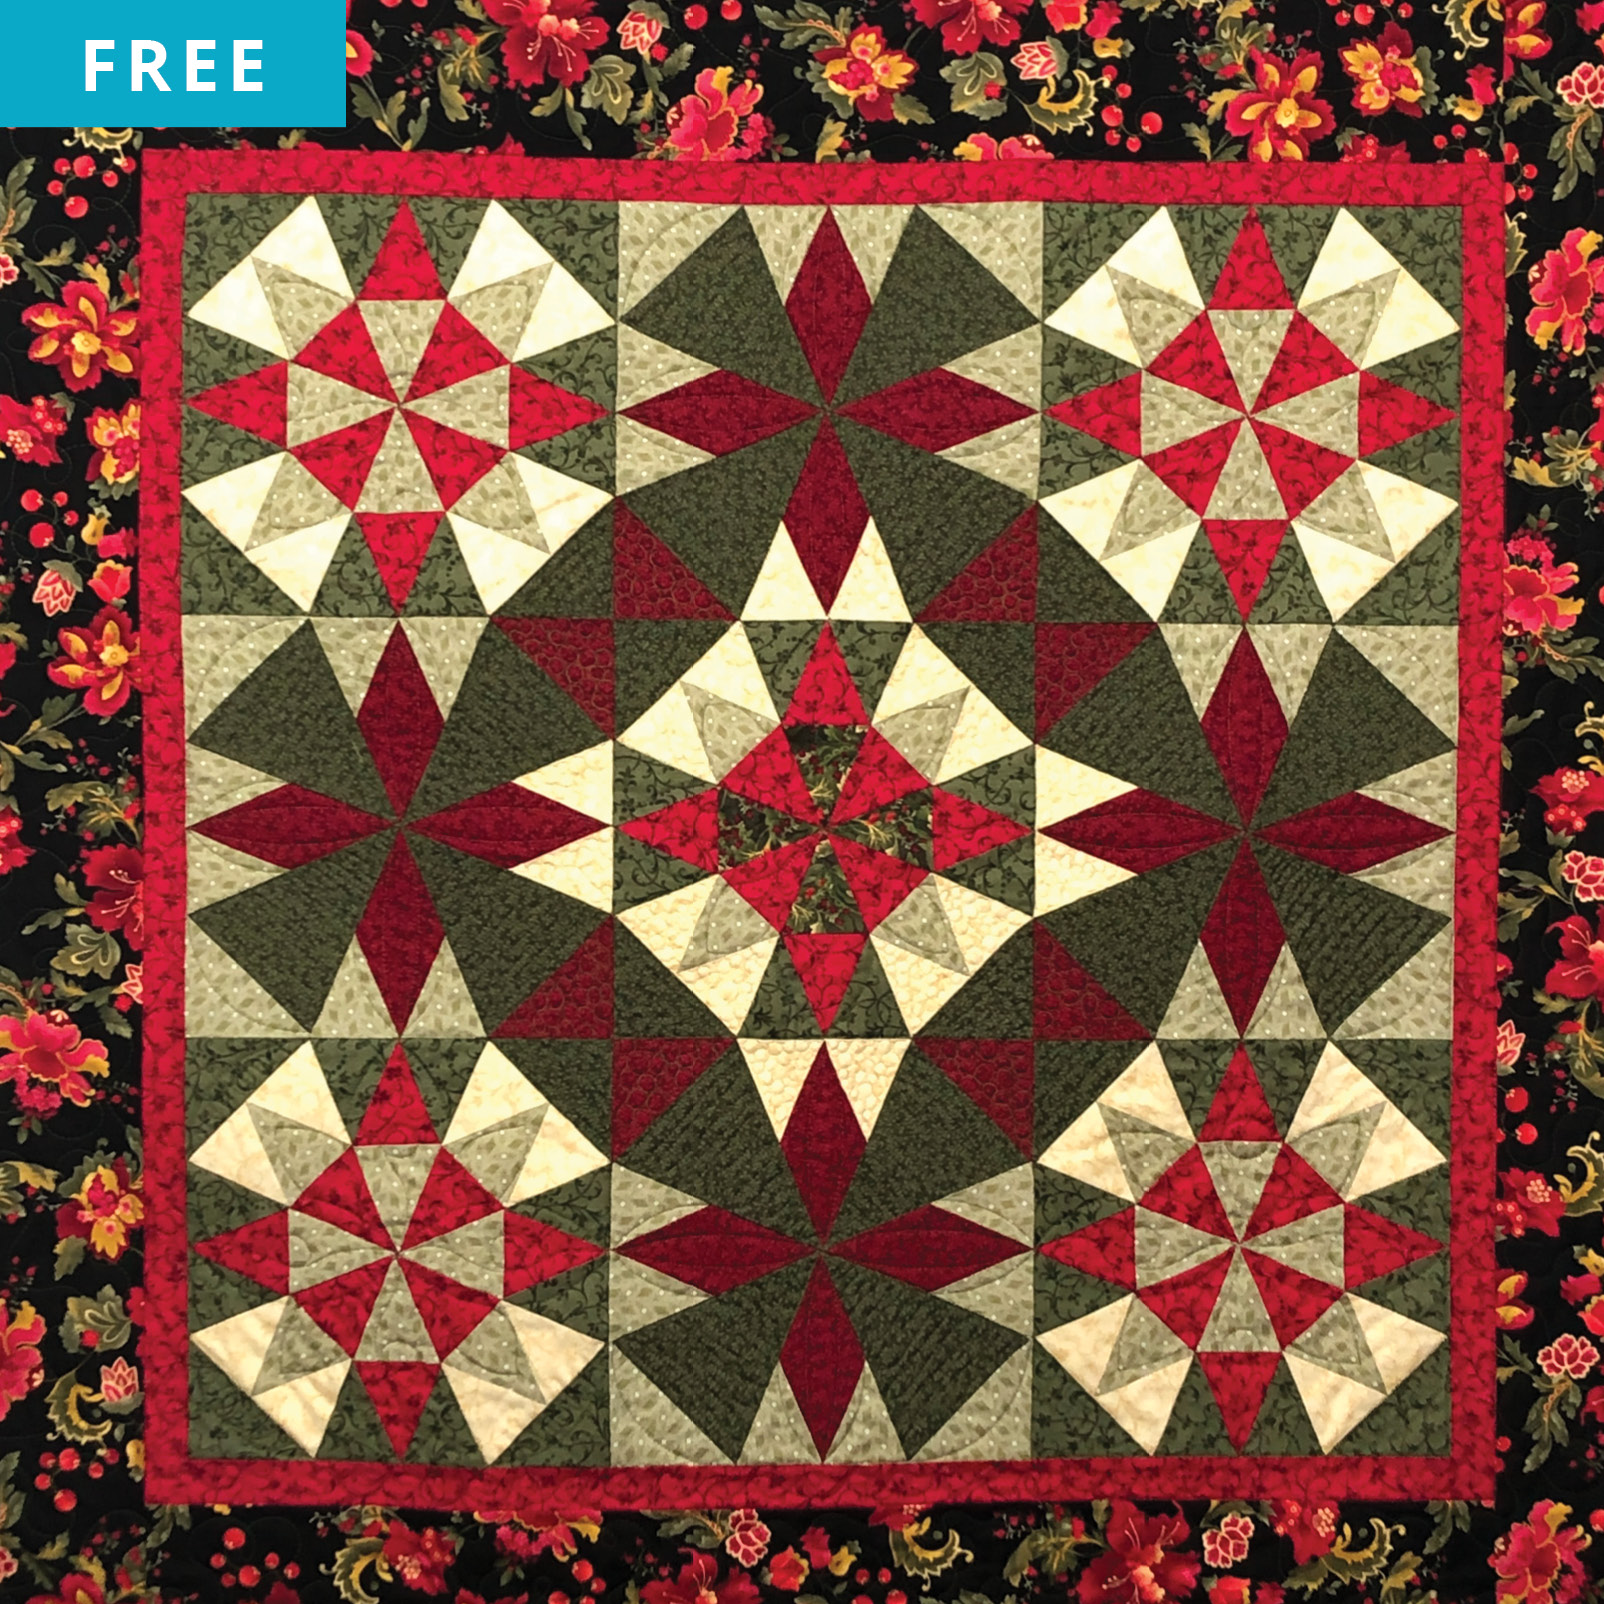 Free Quilt Pattern - Christmas Gathering Wall Hanging